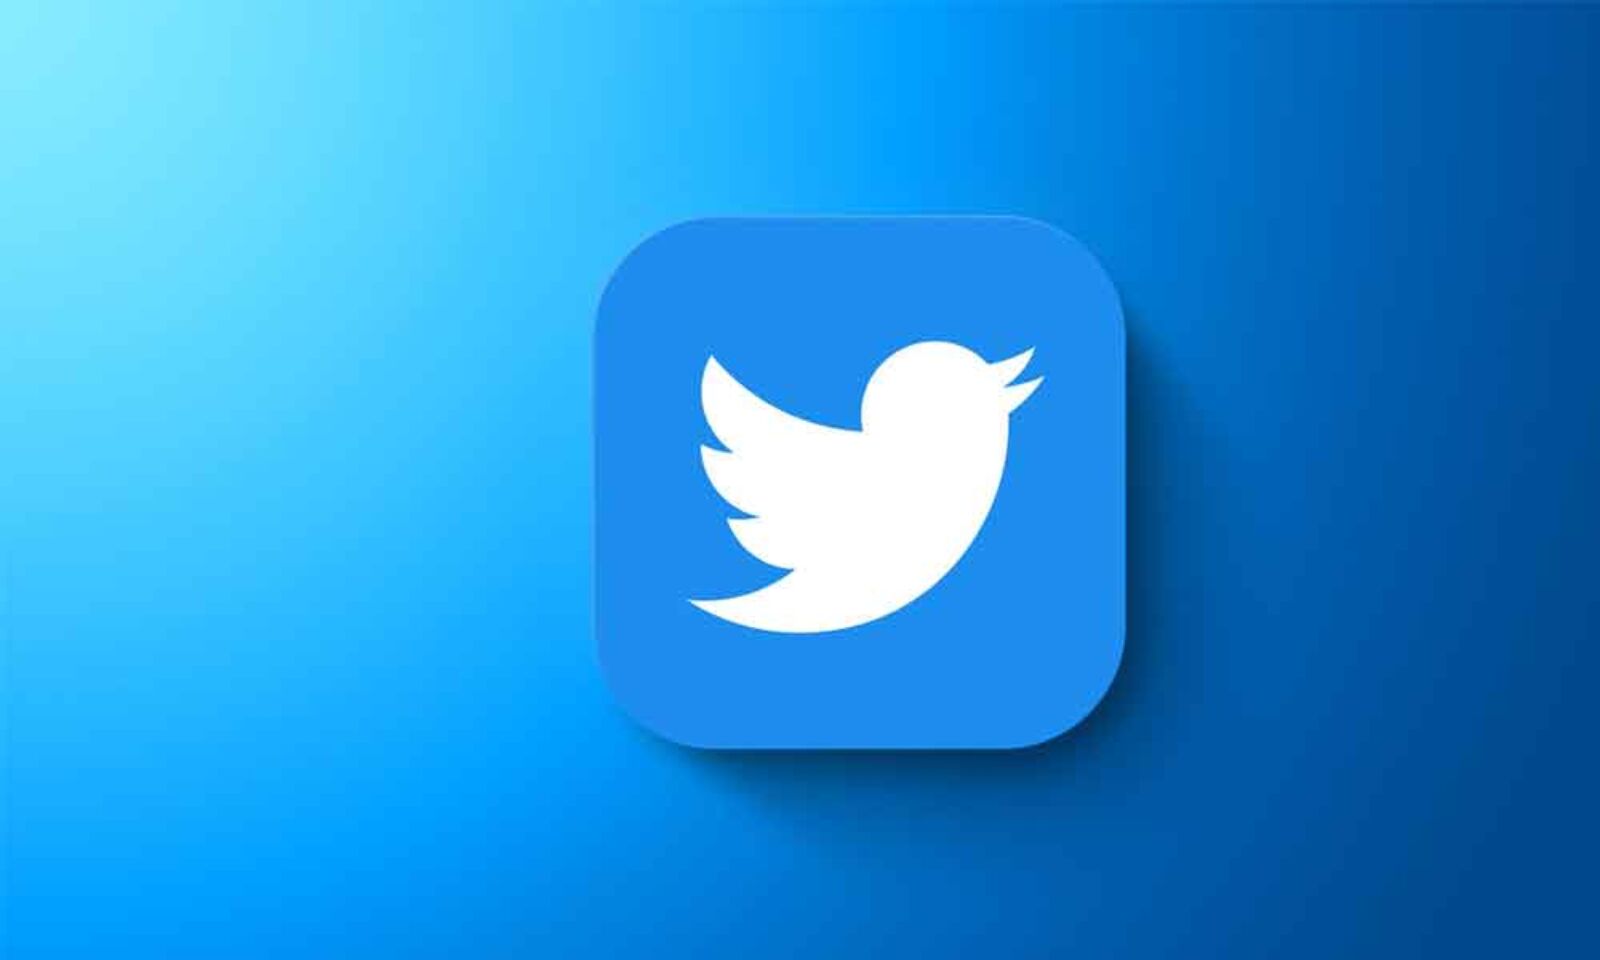 Twitter is working to fix disappearing tweets issue